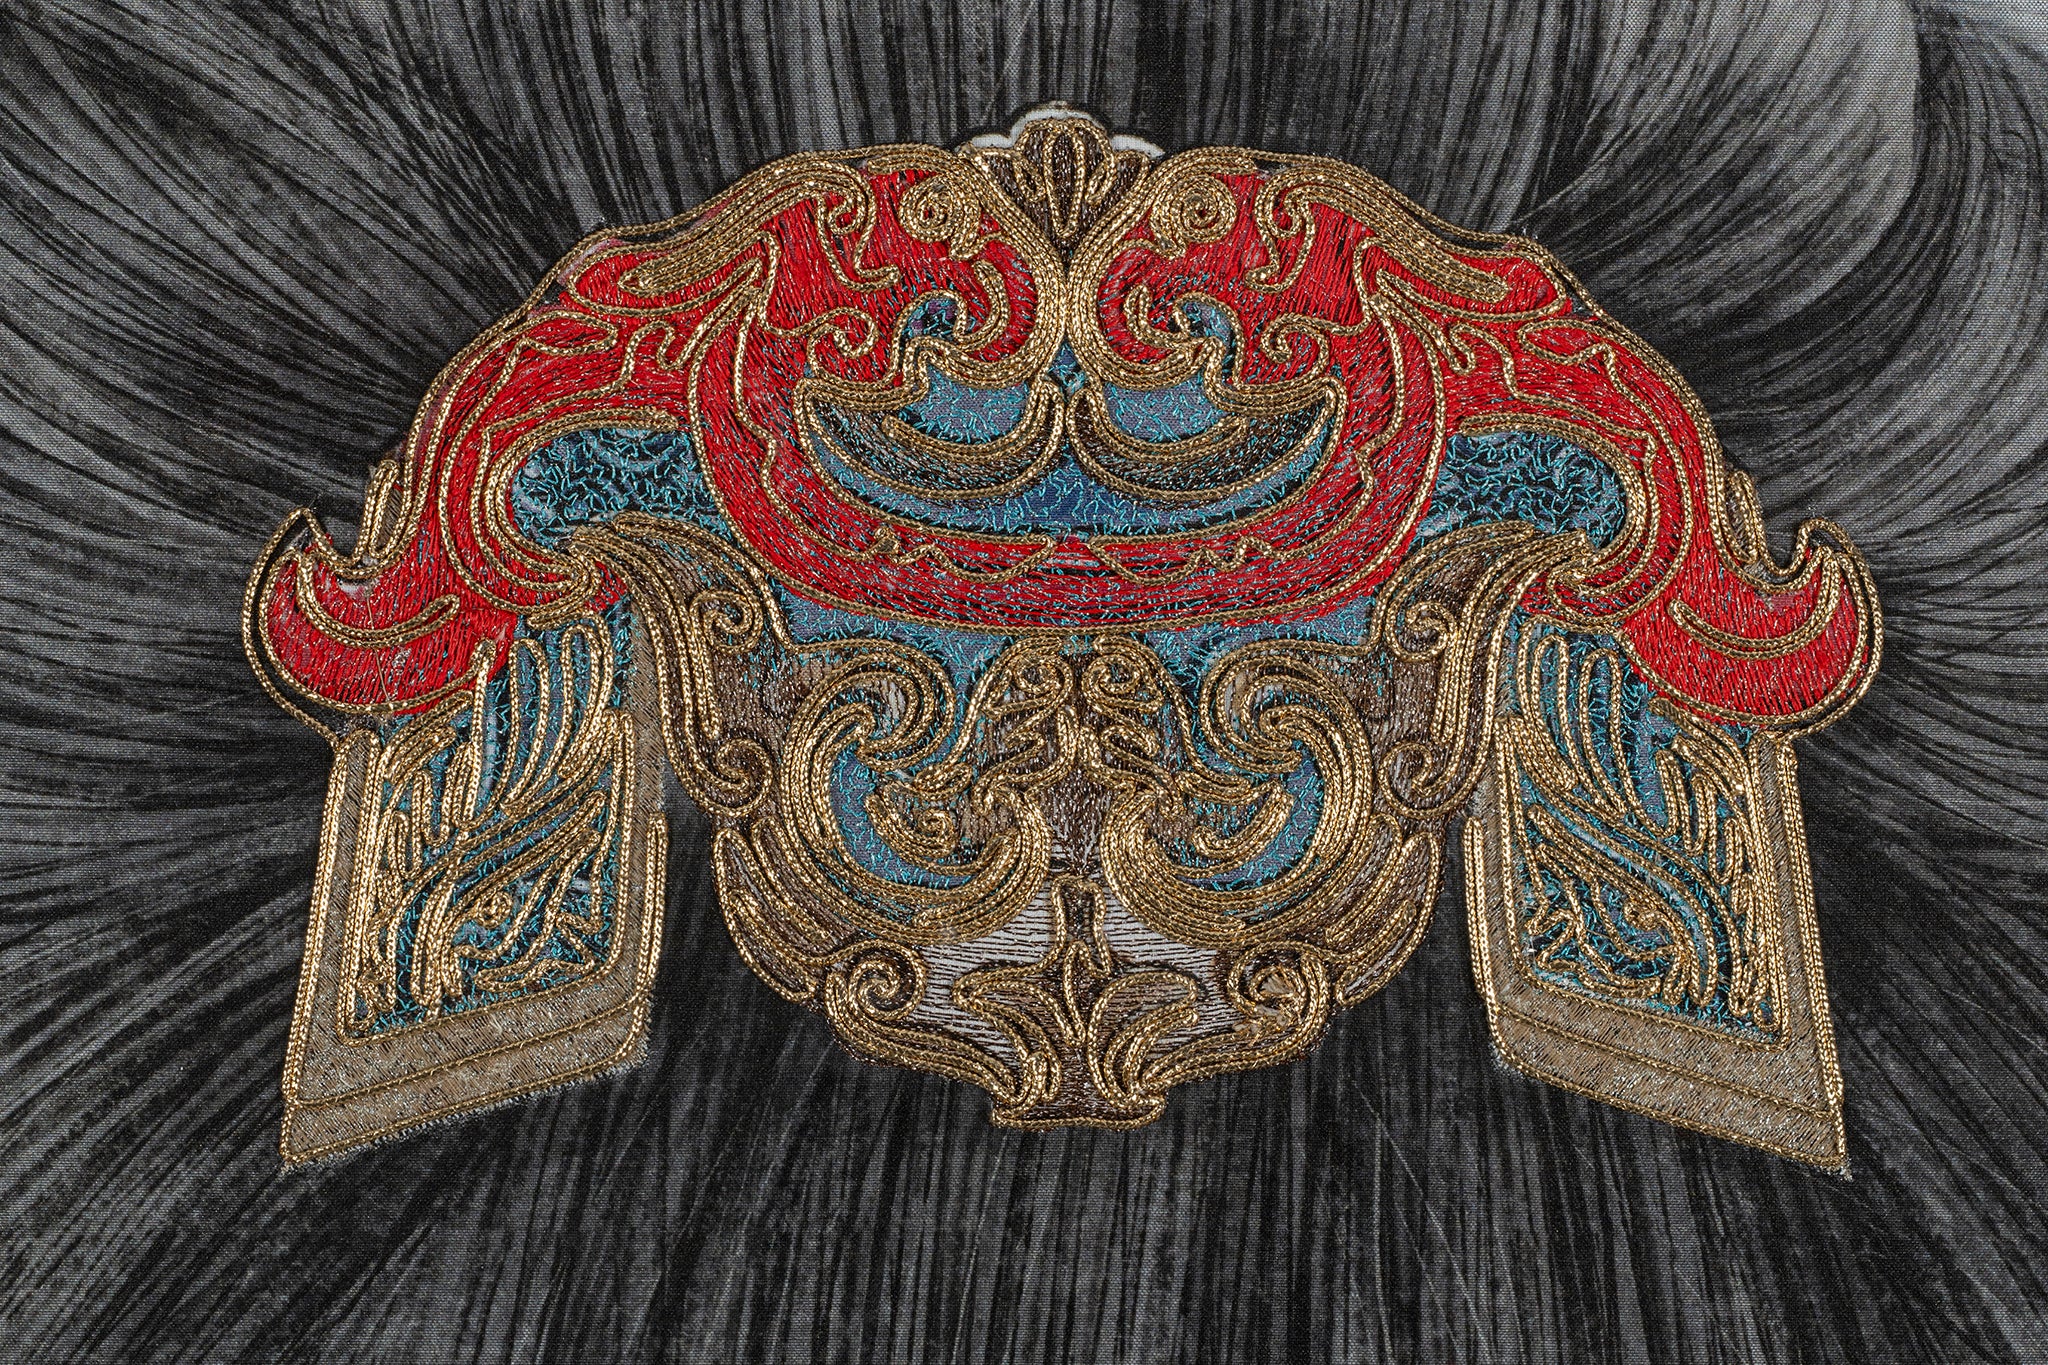 The embroidery art of figure's hairpin pattern design.